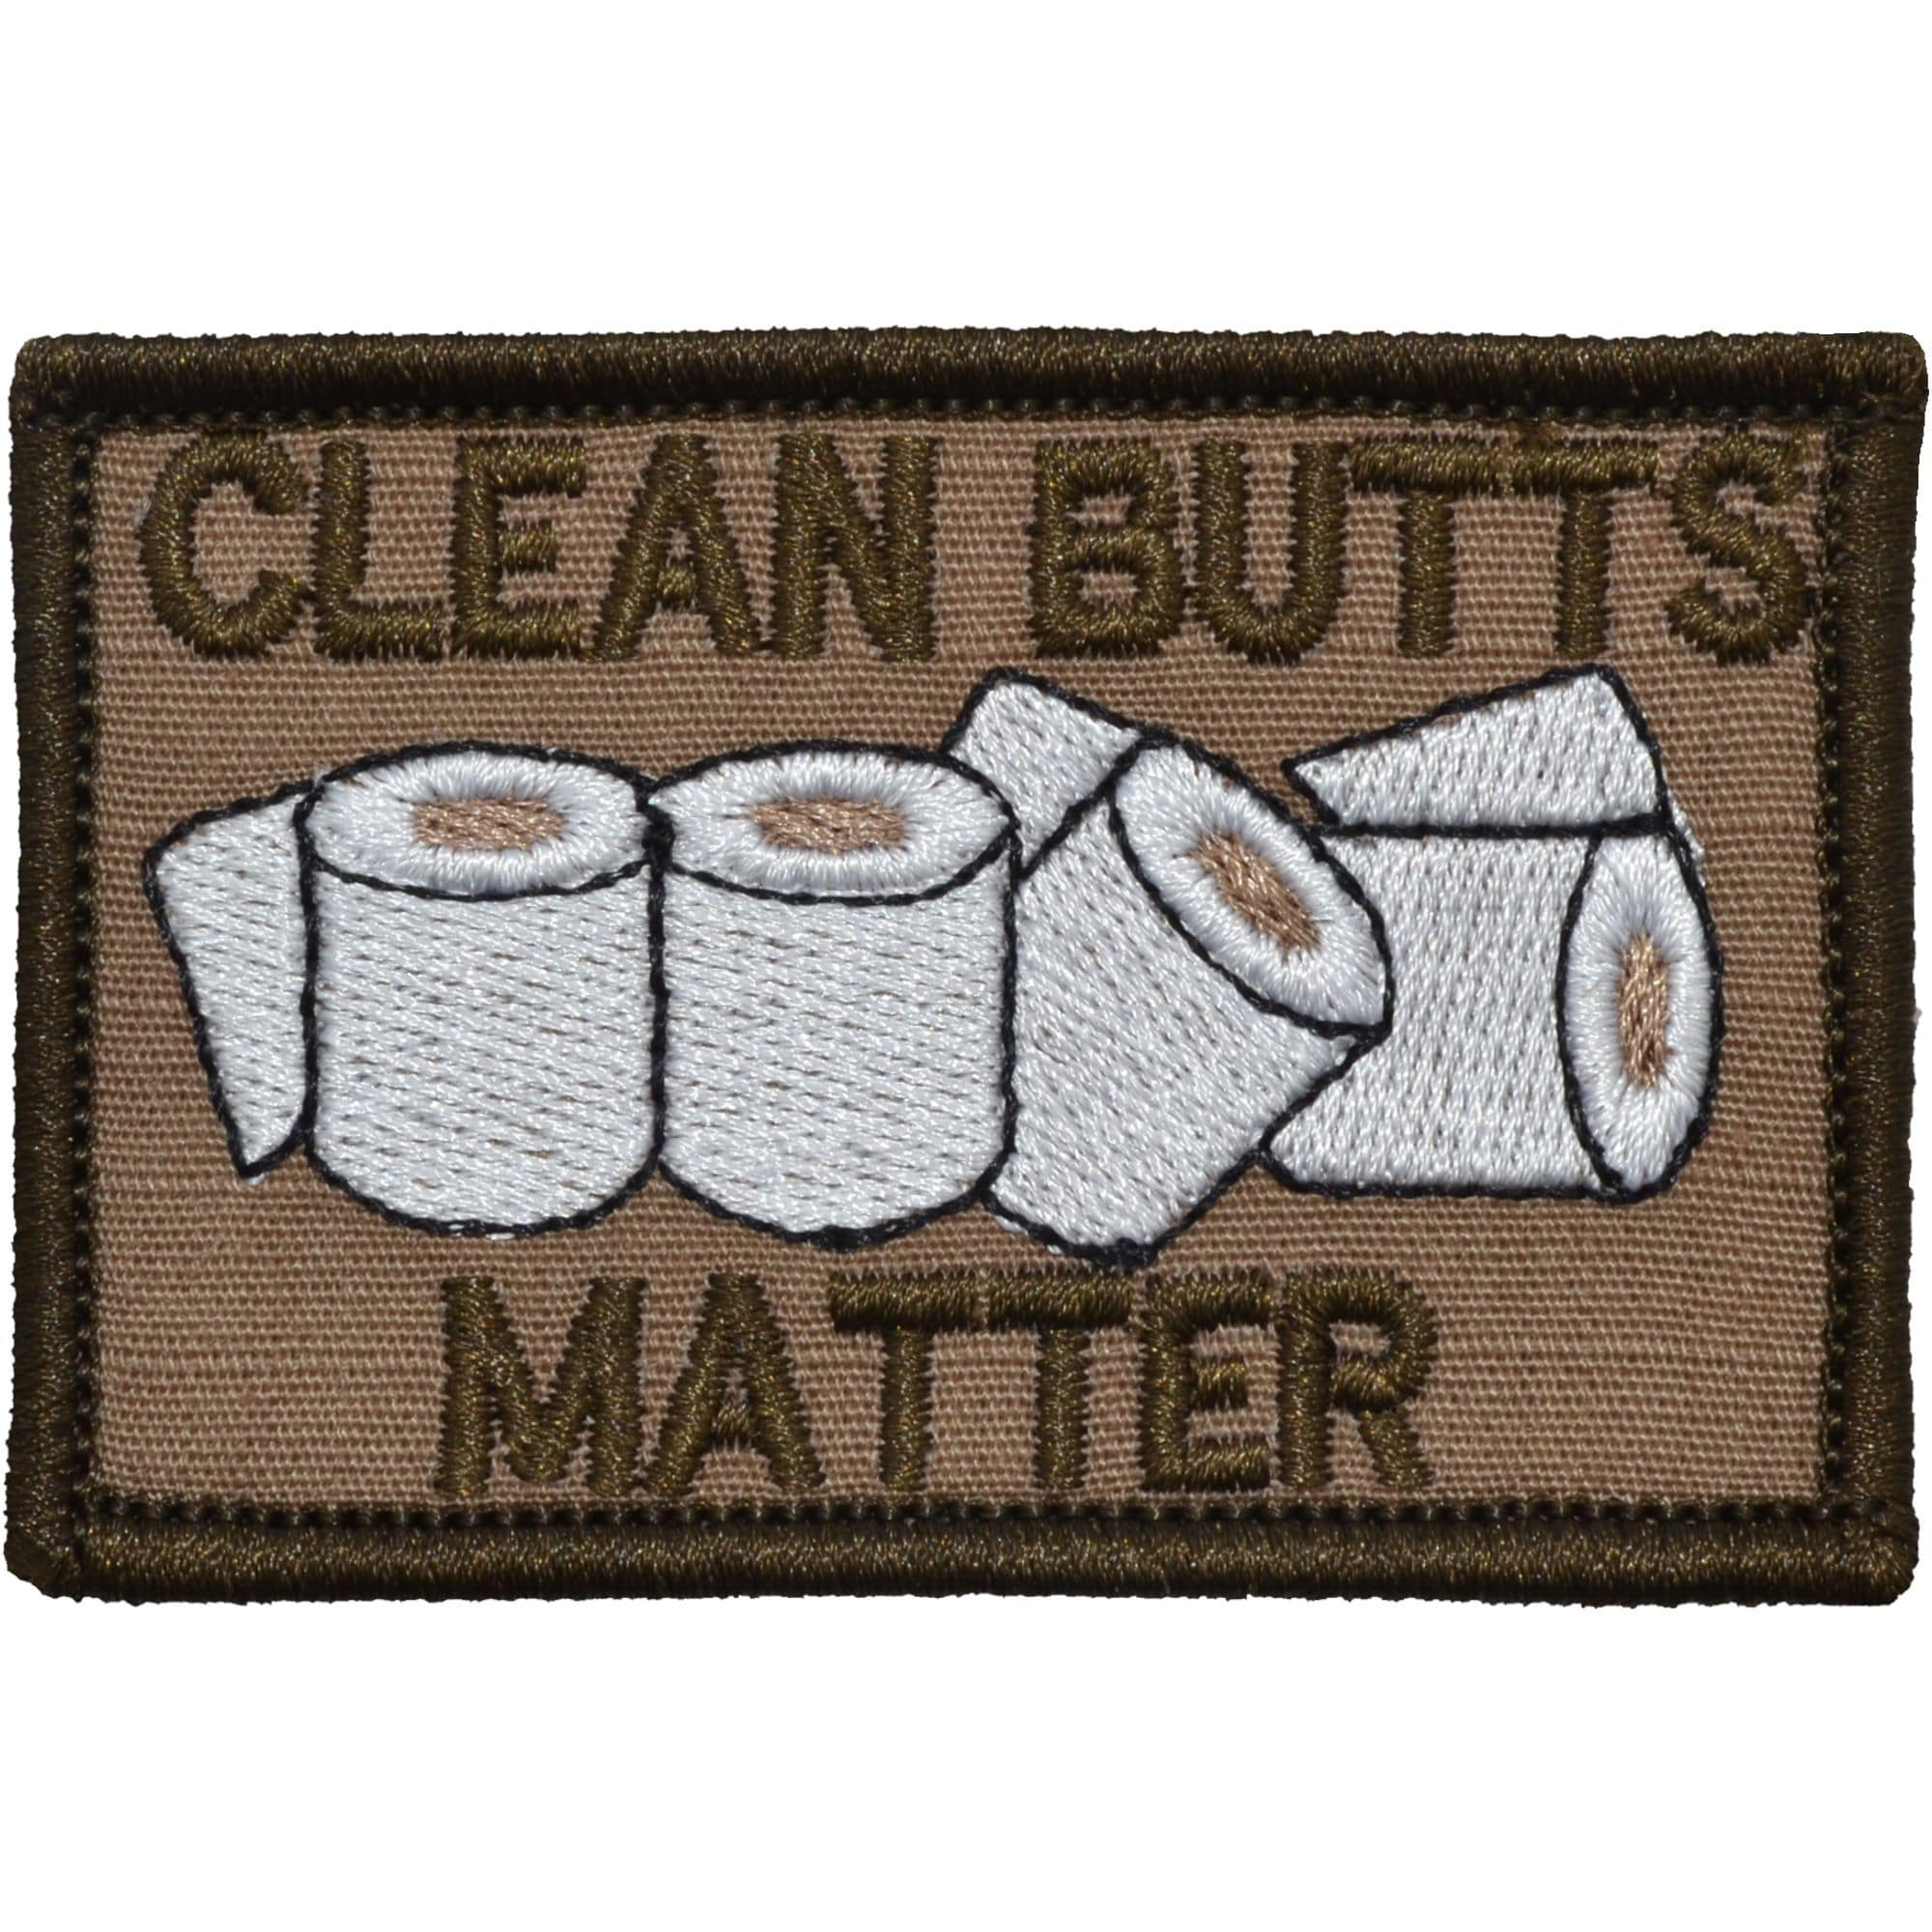 Tactical Gear Junkie Patches Coyote Brown Clean Butts Matter - 2x3 Patch